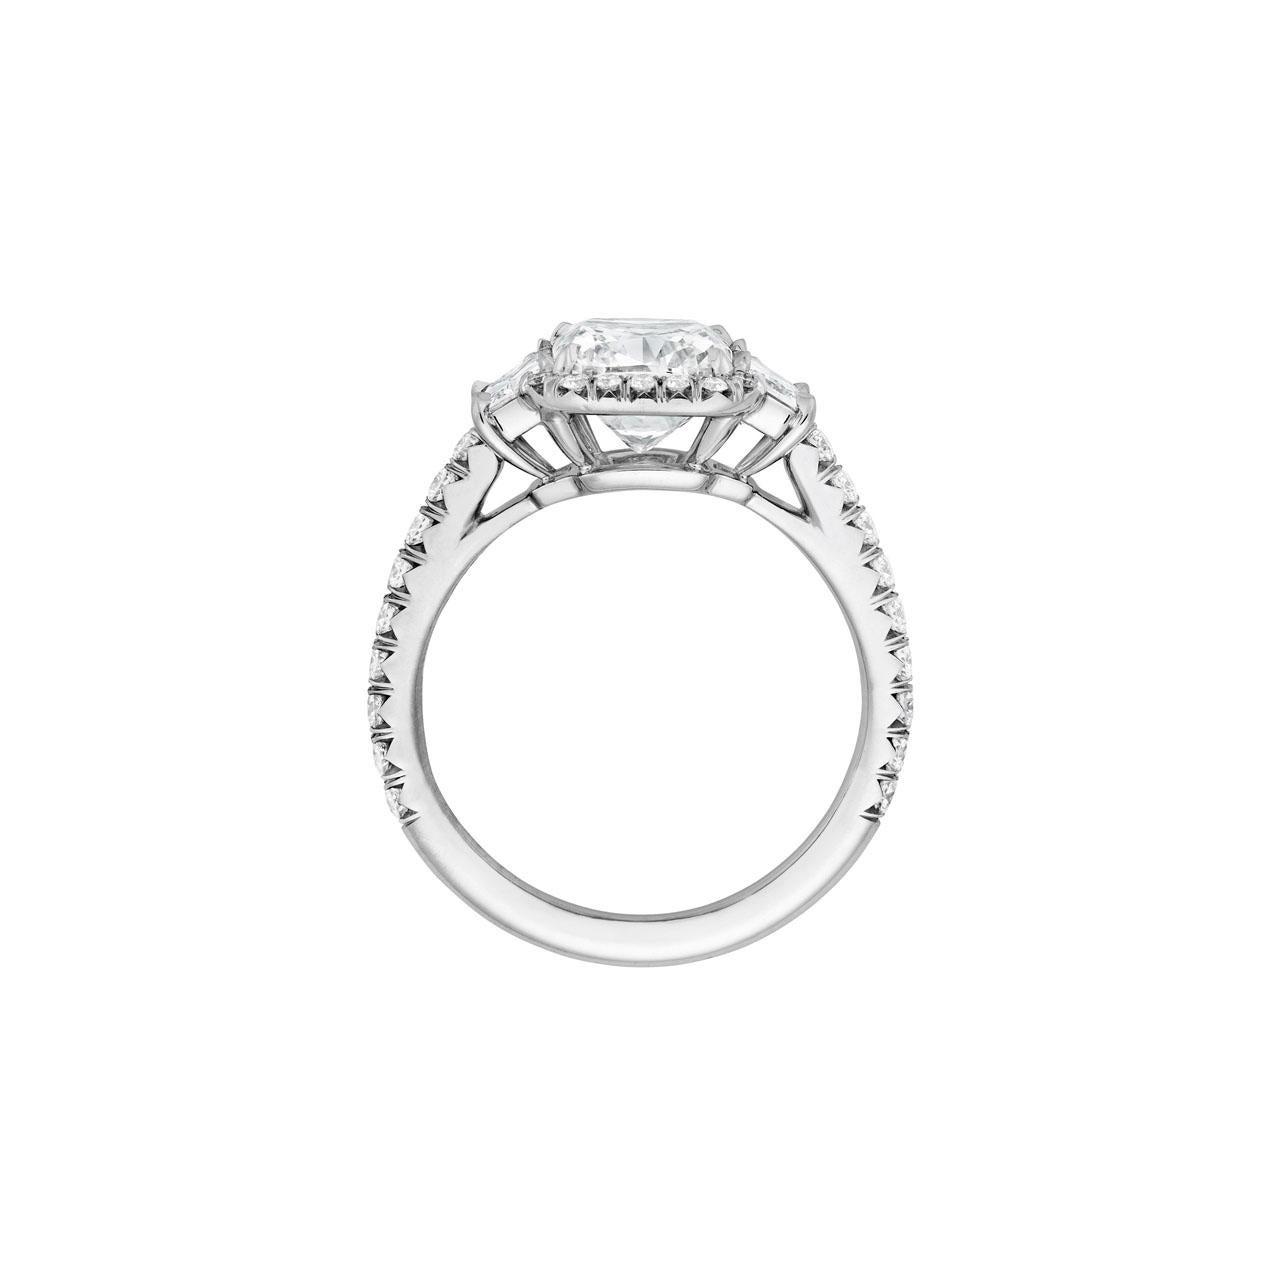 This stunning 2.01 GVS2 GIA certified Cushion Cut Platinum diamond ring is not your typical halo! How about a pair of Brilliant Cut Trapezoids .40 TW to enrich the .41TW FVS small micro pave melee! It is a size 6.25 but can easily be sized. If you